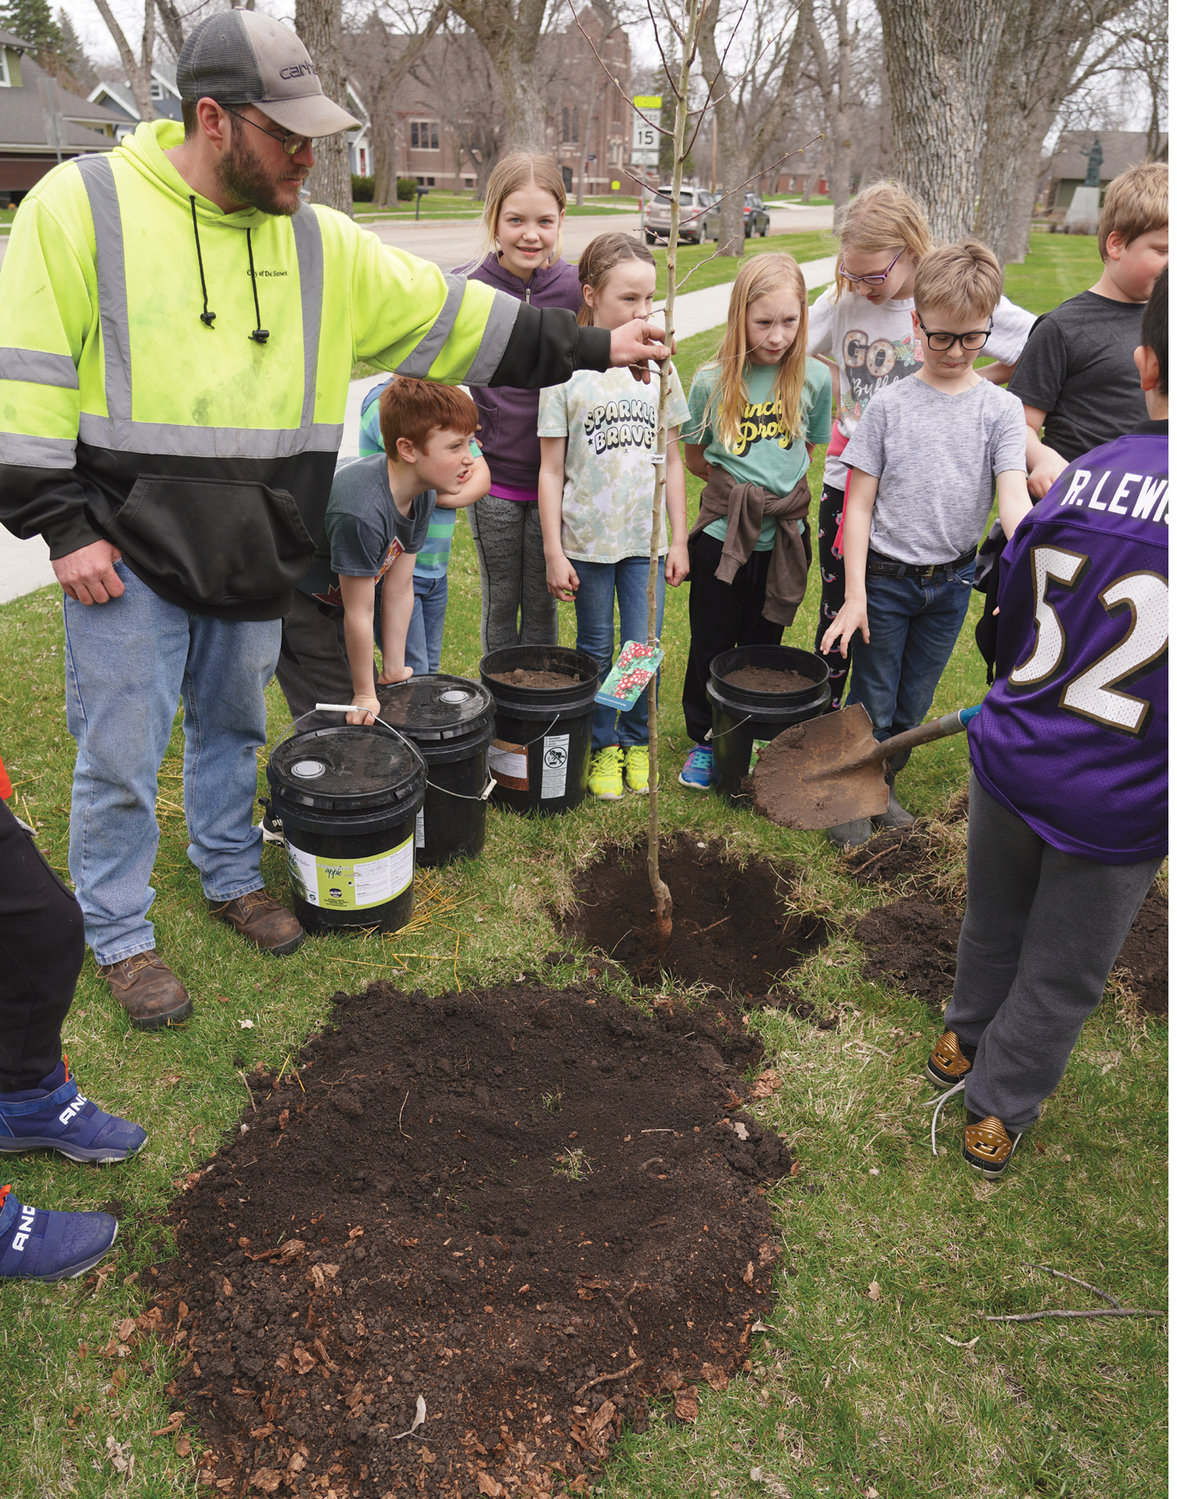 Arbor Day was April 29, but rain postponed some Arbor Day activities until last Friday. Students from Tacy Boldt’s third-grade class at Laura Ingalls Wilder Elementary School walked over to Washington Park to help plant a tree in honor of Arbor Day. The class planted a Crimson Cloud Hawthorn on the north side of the park with assistance from the Kingsbury Conservation District and City of De Smet employees Jason Springer and Karen Hansen.